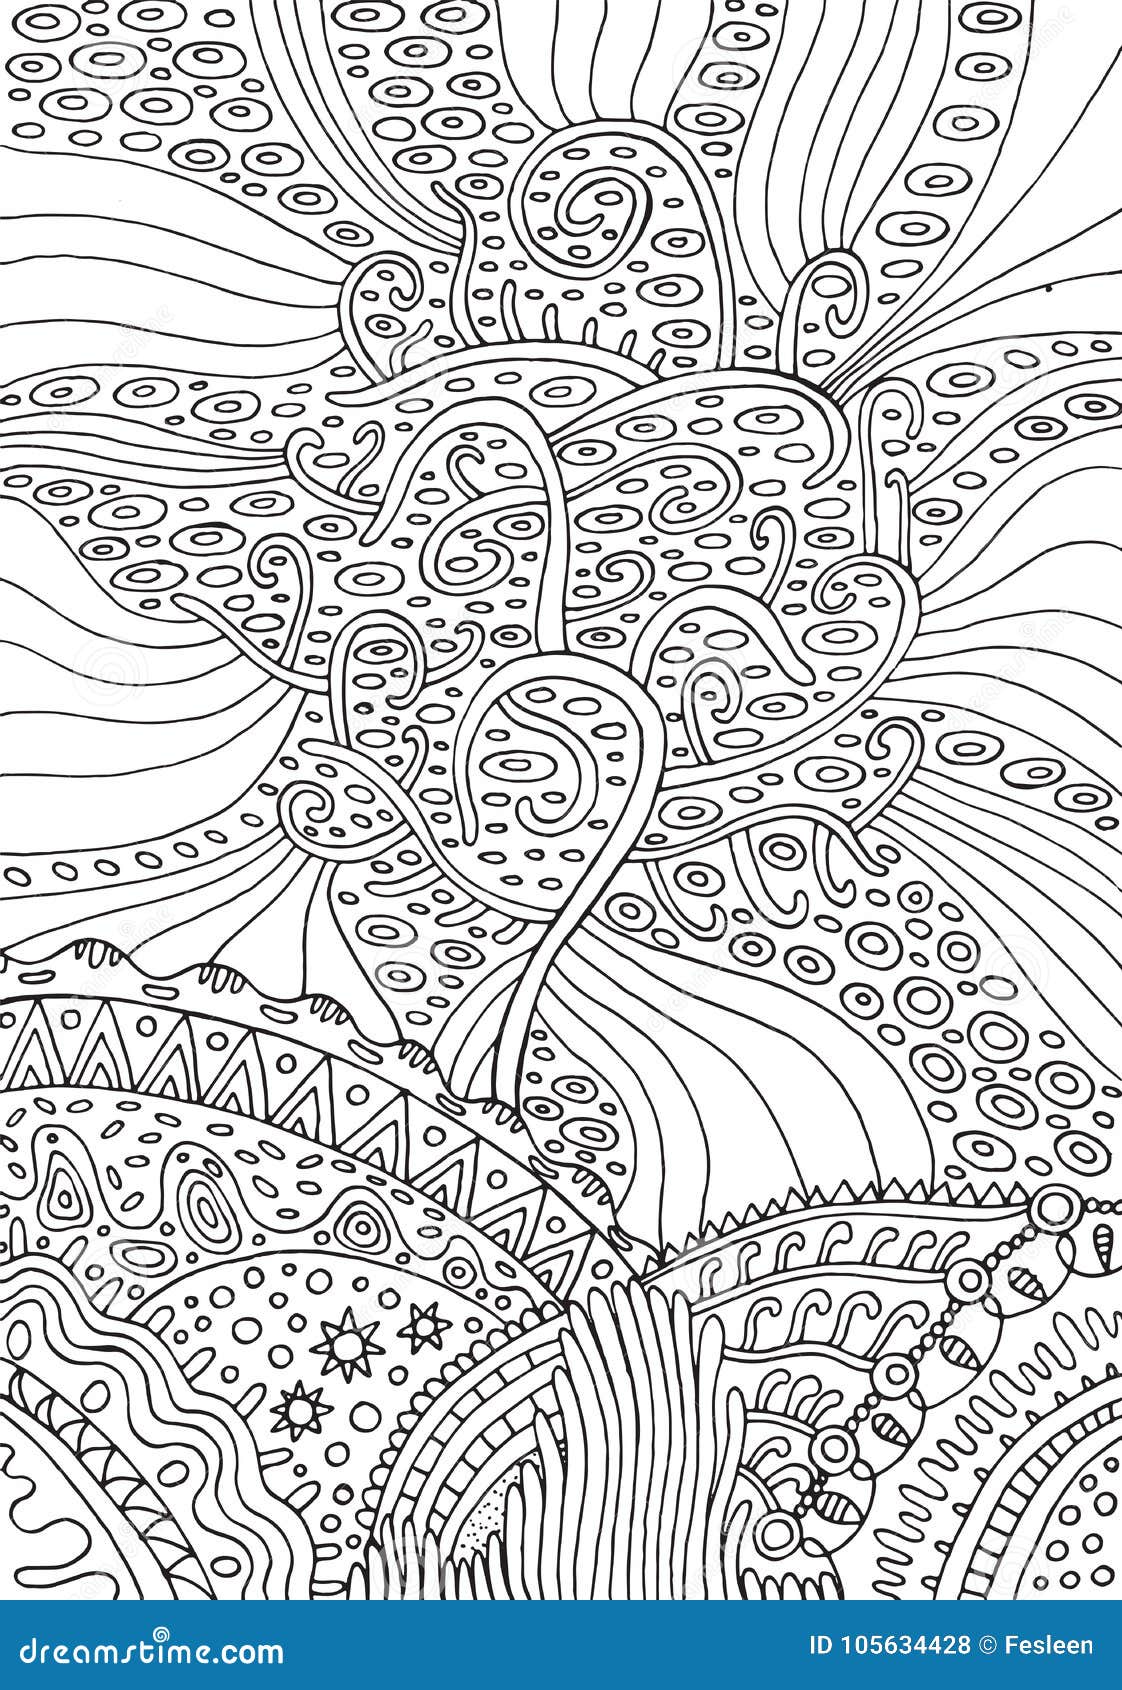 Psychedelic coloring stock illustrations â psychedelic coloring stock illustrations vectors clipart